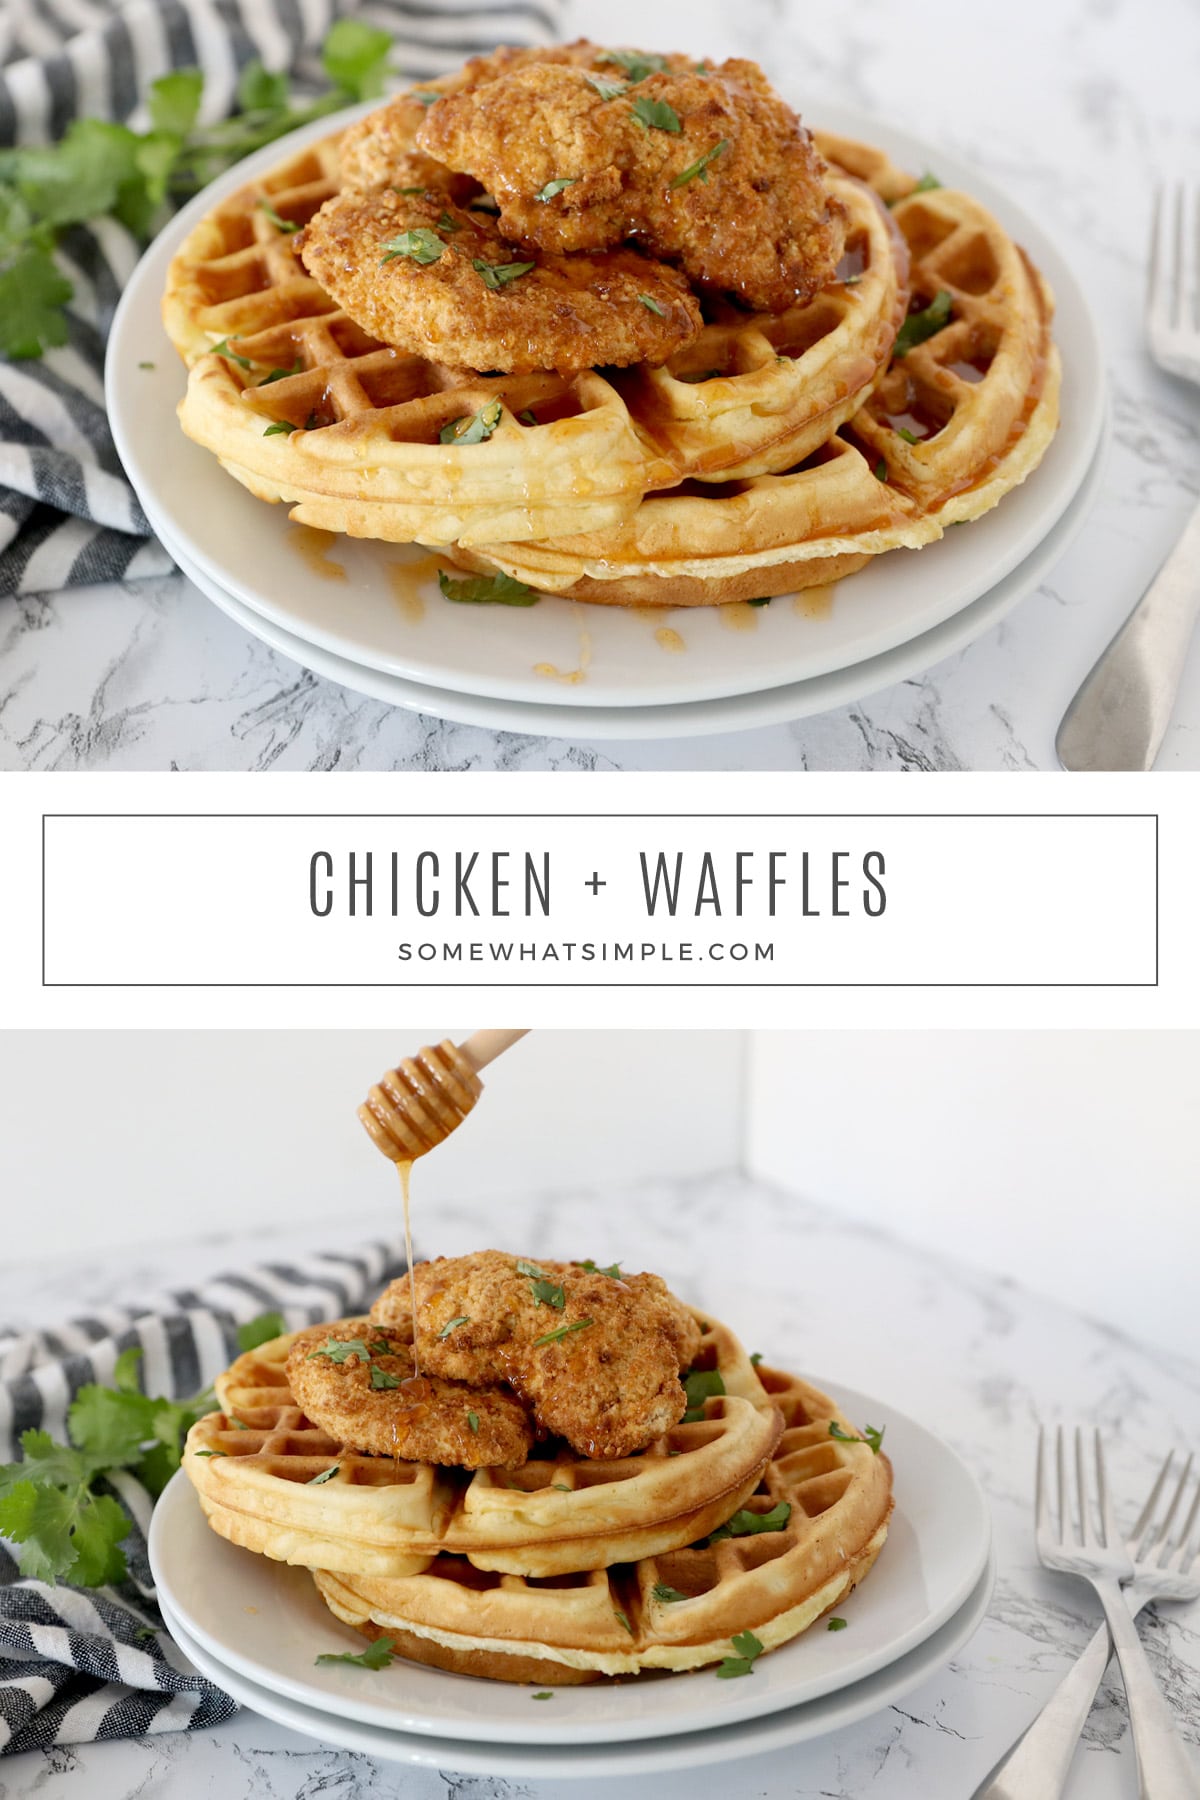 Chicken and waffles are a well-known culinary combination in the Southern U.S. Follow our simple recipe and enjoy this delicious dish in the comfort of your home! via @somewhatsimple